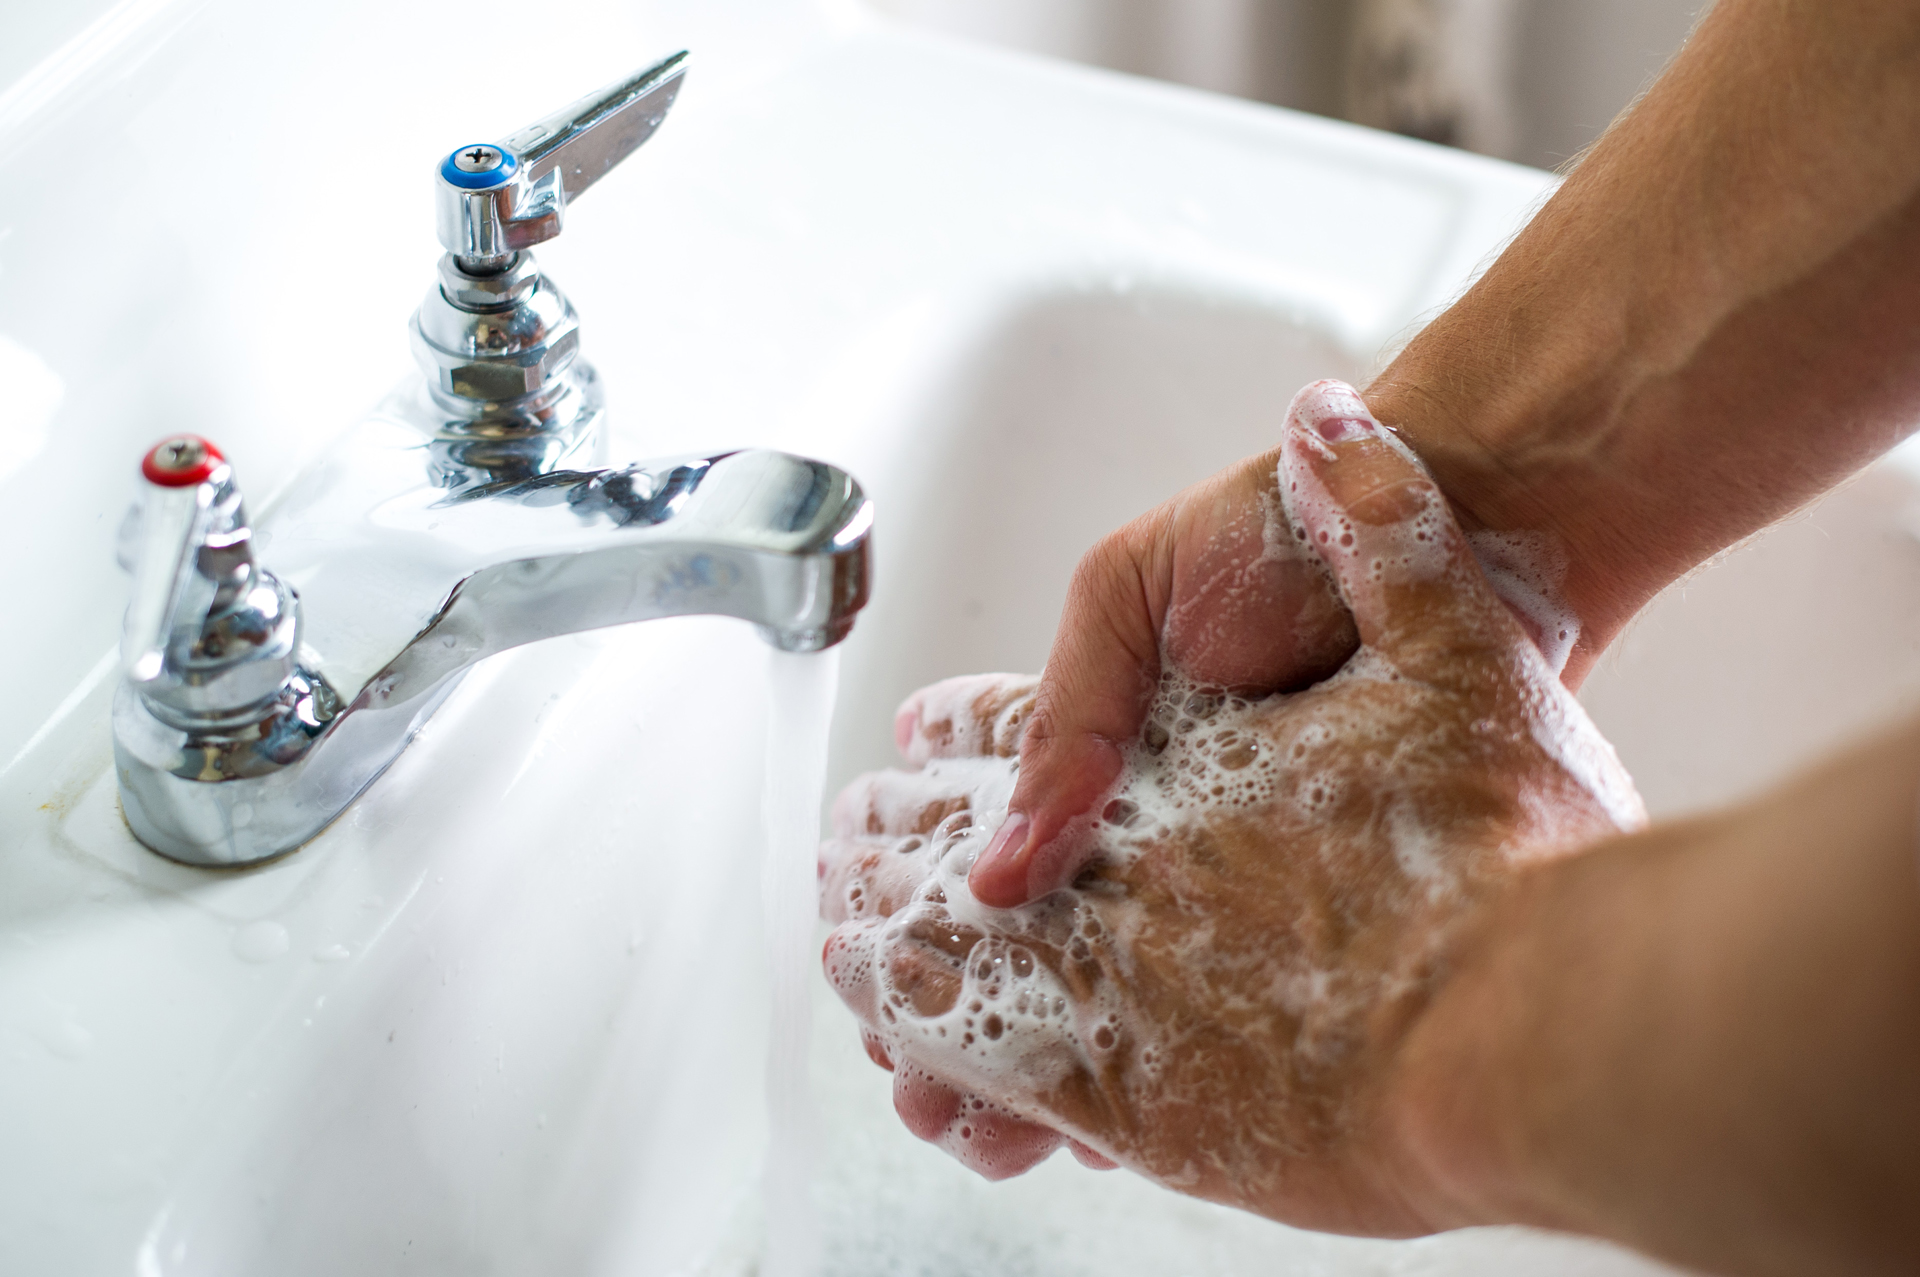 Why You Should Avoid Soaps Labeled “Anti-Bacterial”